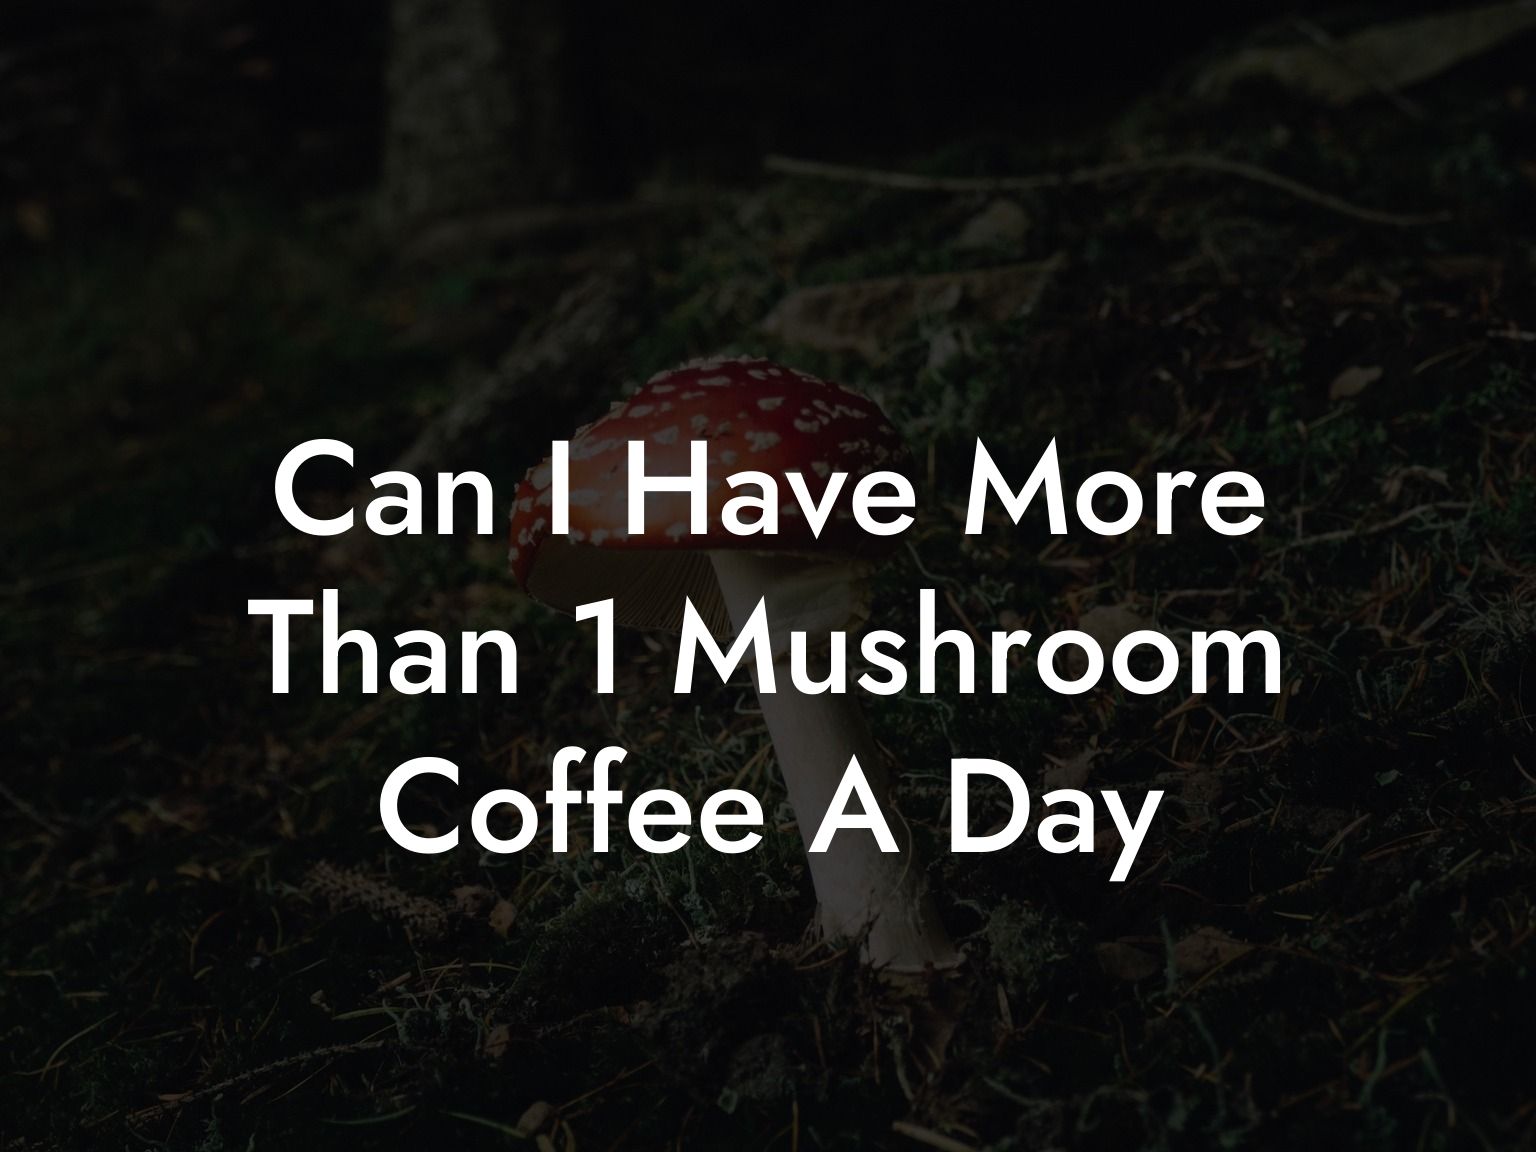 Can I Have More Than 1 Mushroom Coffee A Day